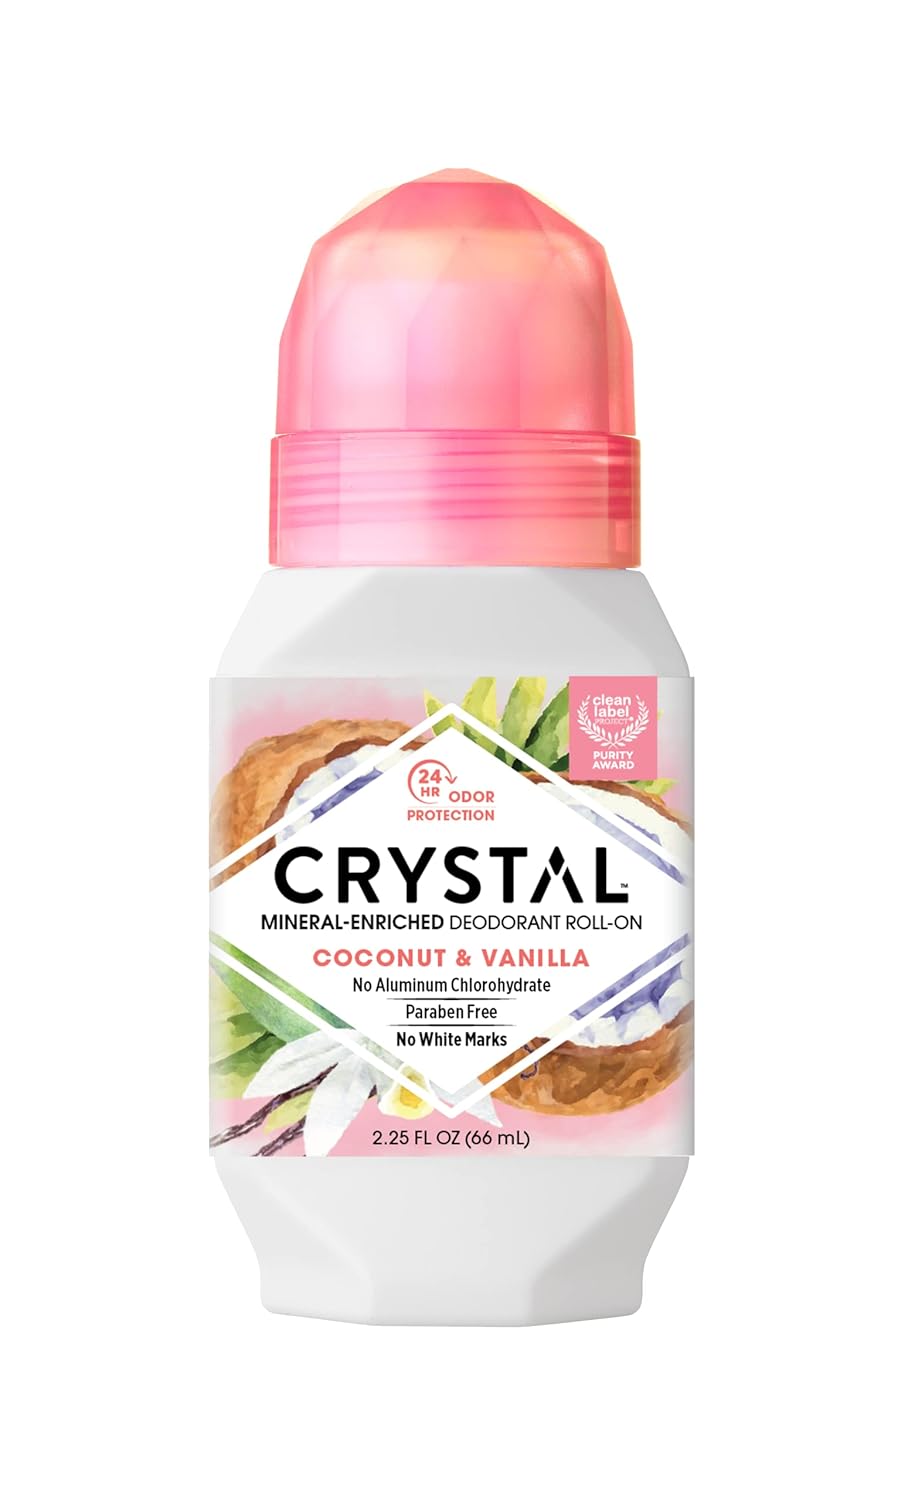 CRYSTAL Mineral Deodorant Coconut Vanilla Roll-On Body Deodorant With 24-Hour Odor Protection, Paraben Free, 2.25 FL OZ (Packaging May Vary) (2.25 Fl Oz/66ml)